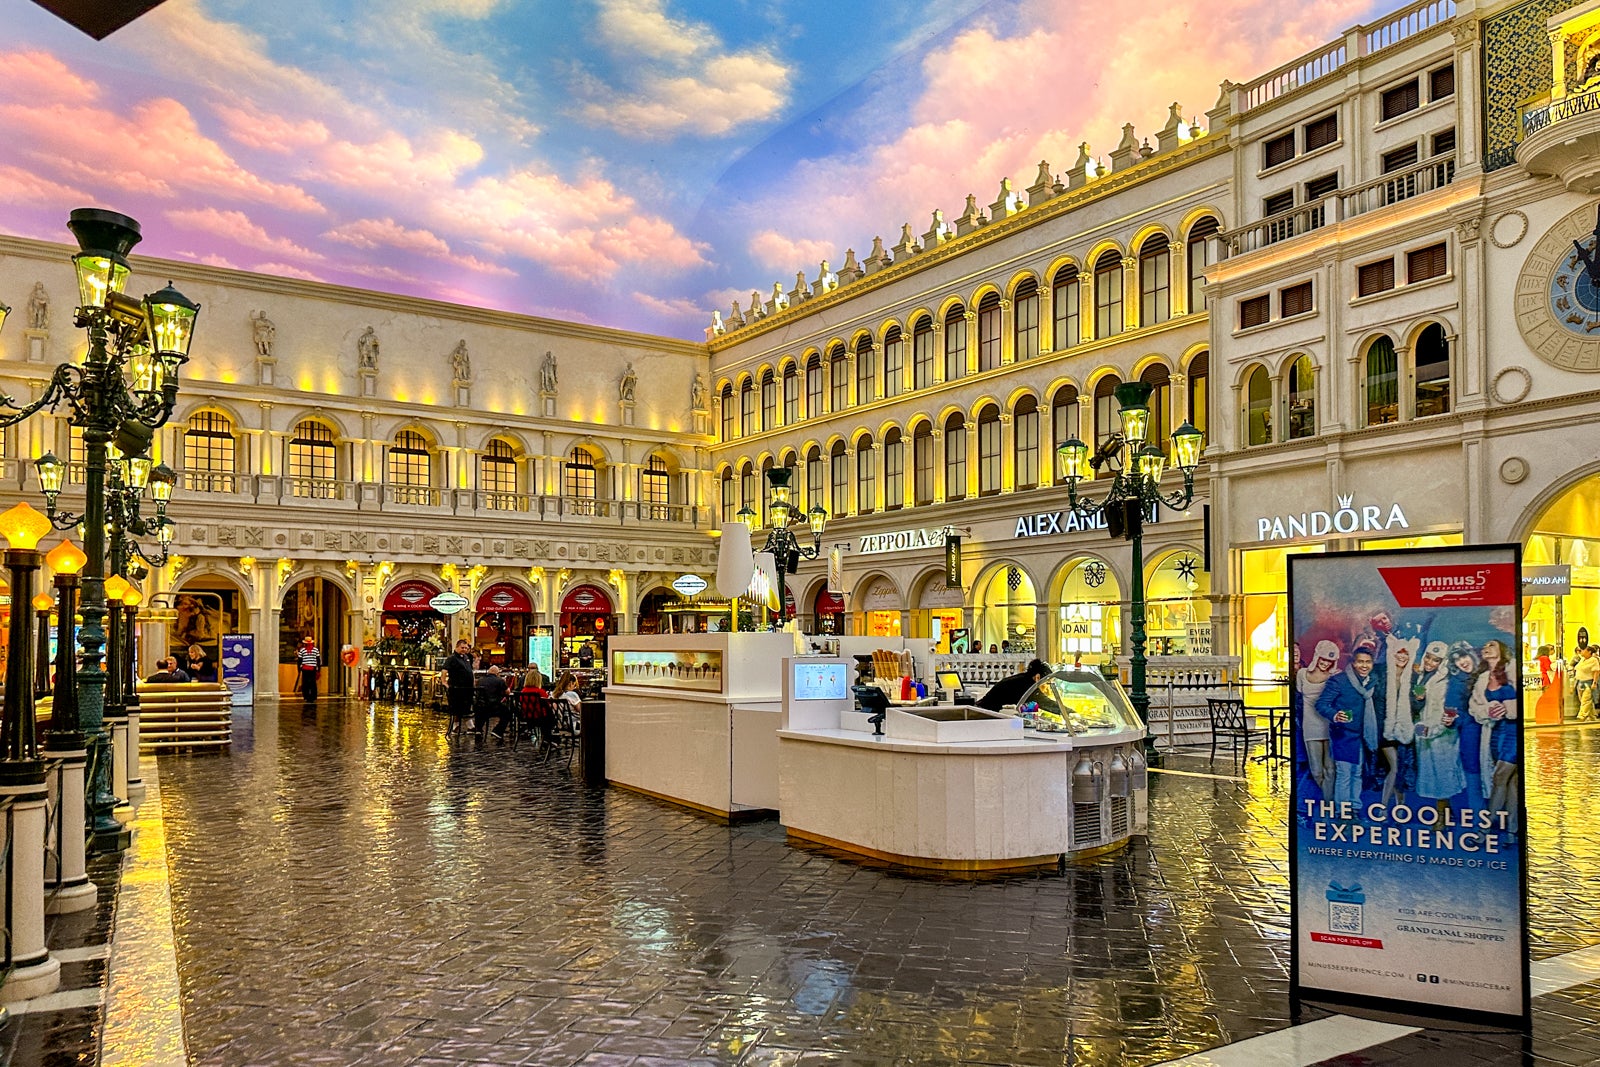 The Venetian considers property upgrades, bonuses for 7K employees, Casinos & Gaming